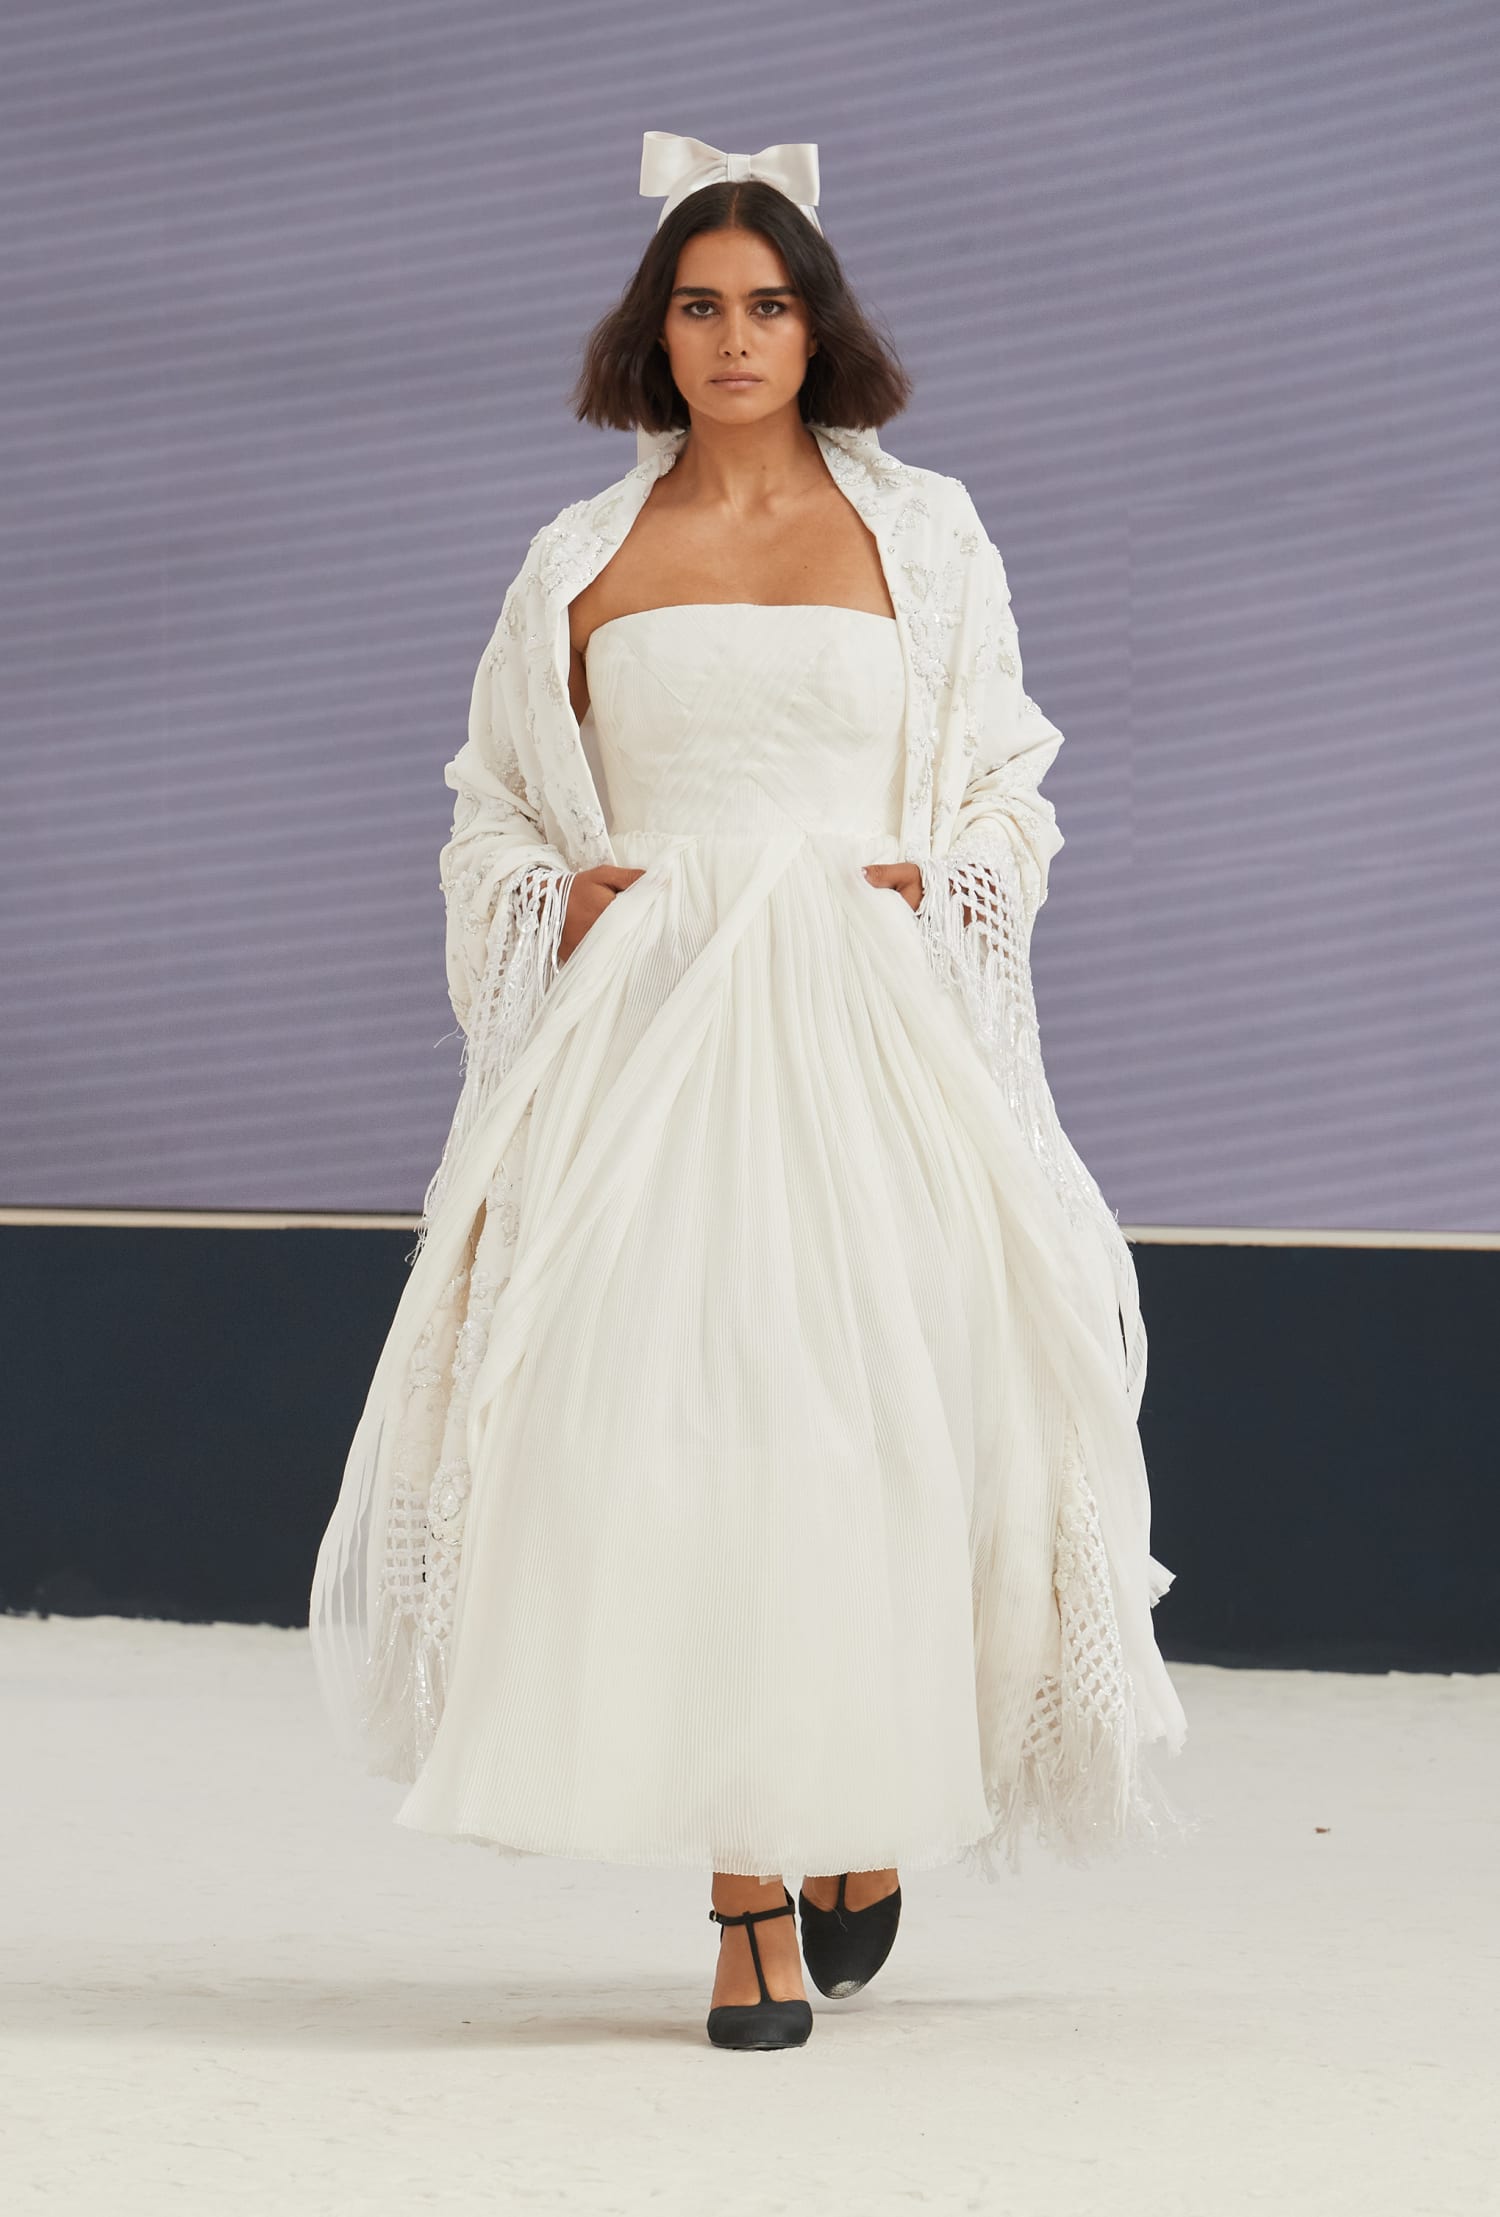 chanel_044_fw_2022_23_hc_collection-LD